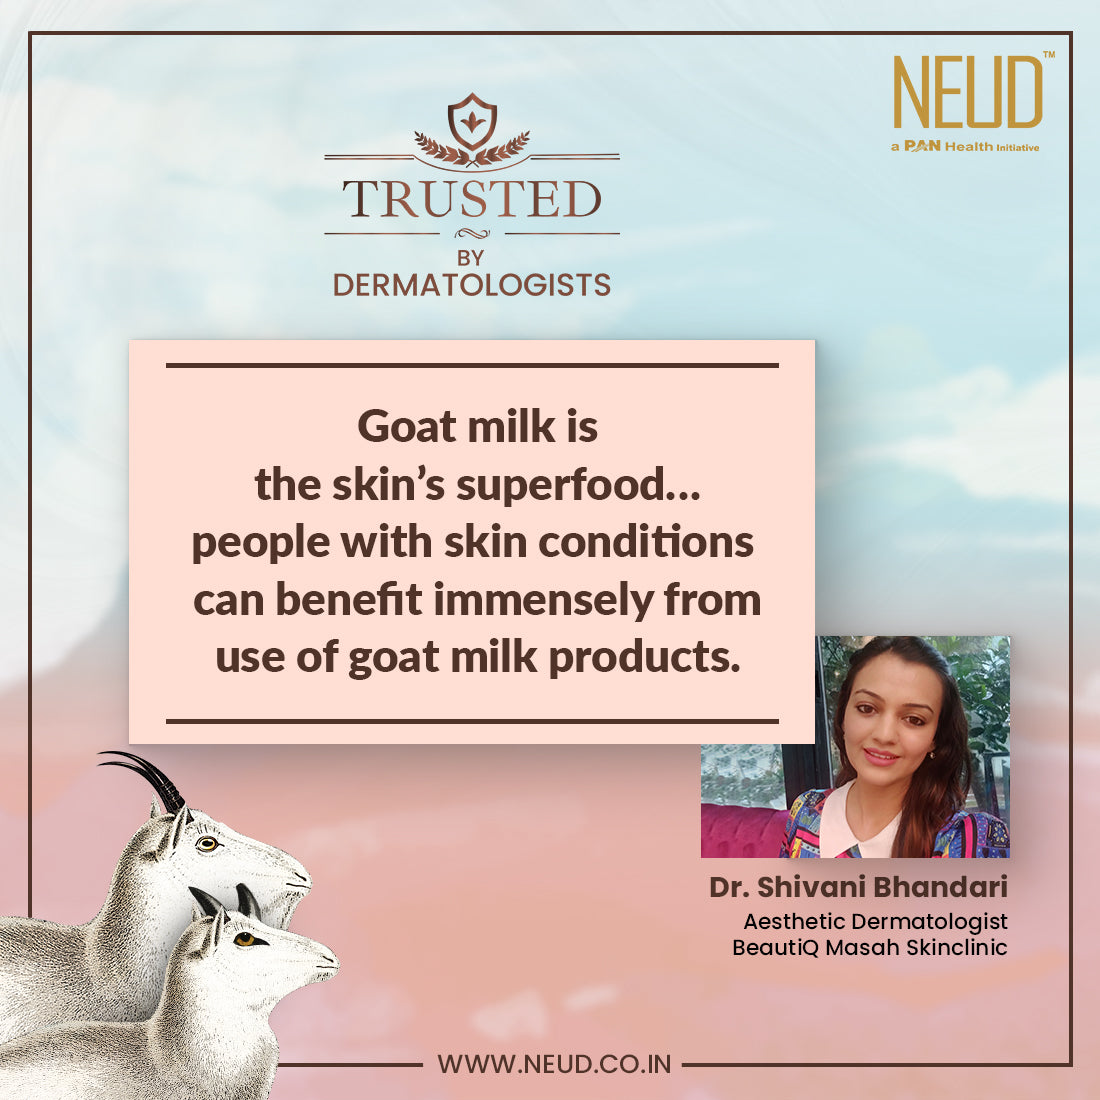 Benefits of goat milk are trusted by dermatologists